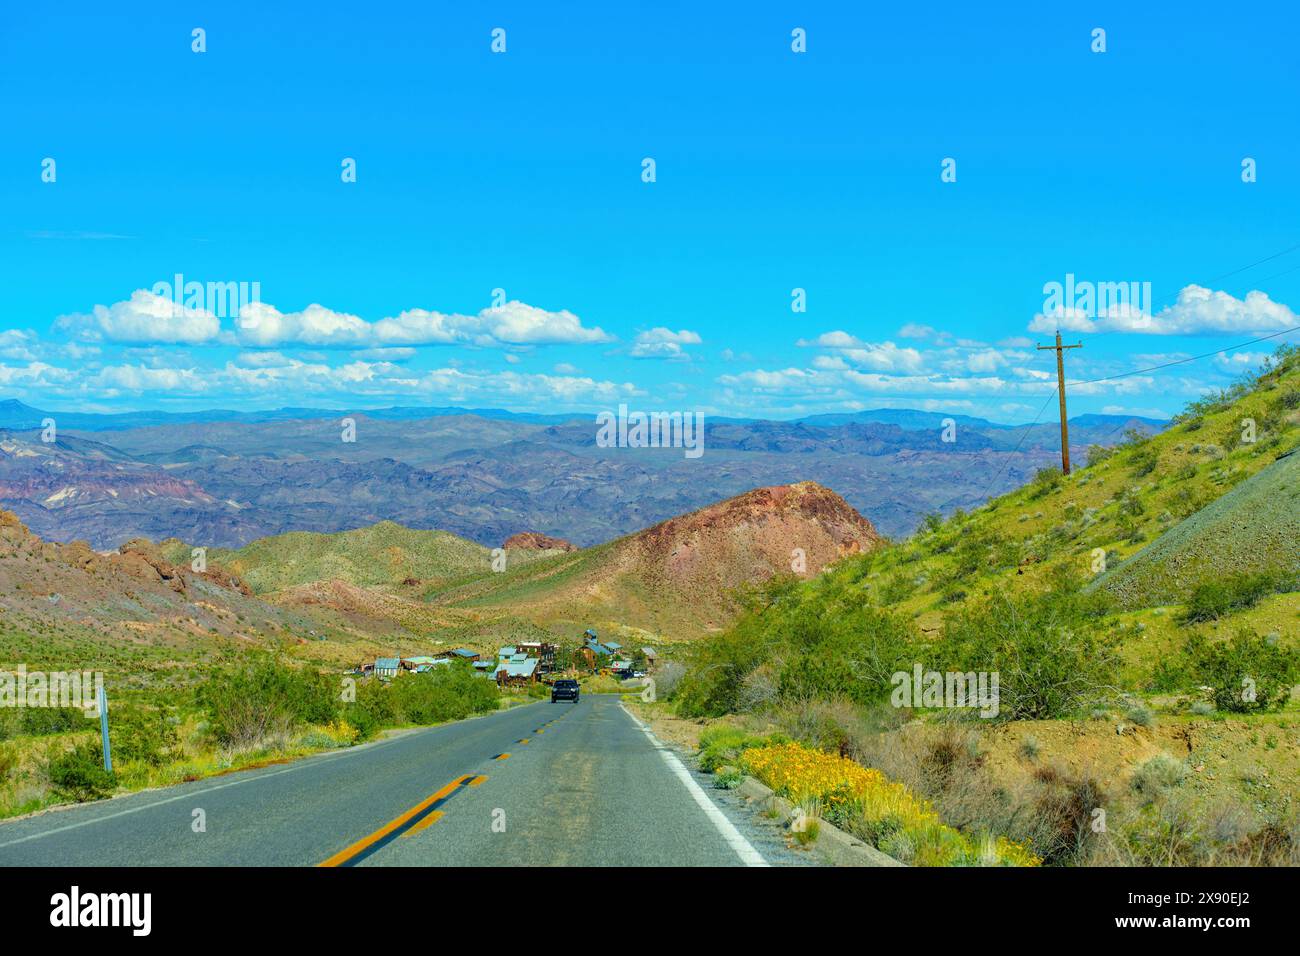 Asphalt road leads the way to an abandoned settlement nestled in the heart of the Nevada desert, surrounded by arid landscapes and rugged terrain. Stock Photo